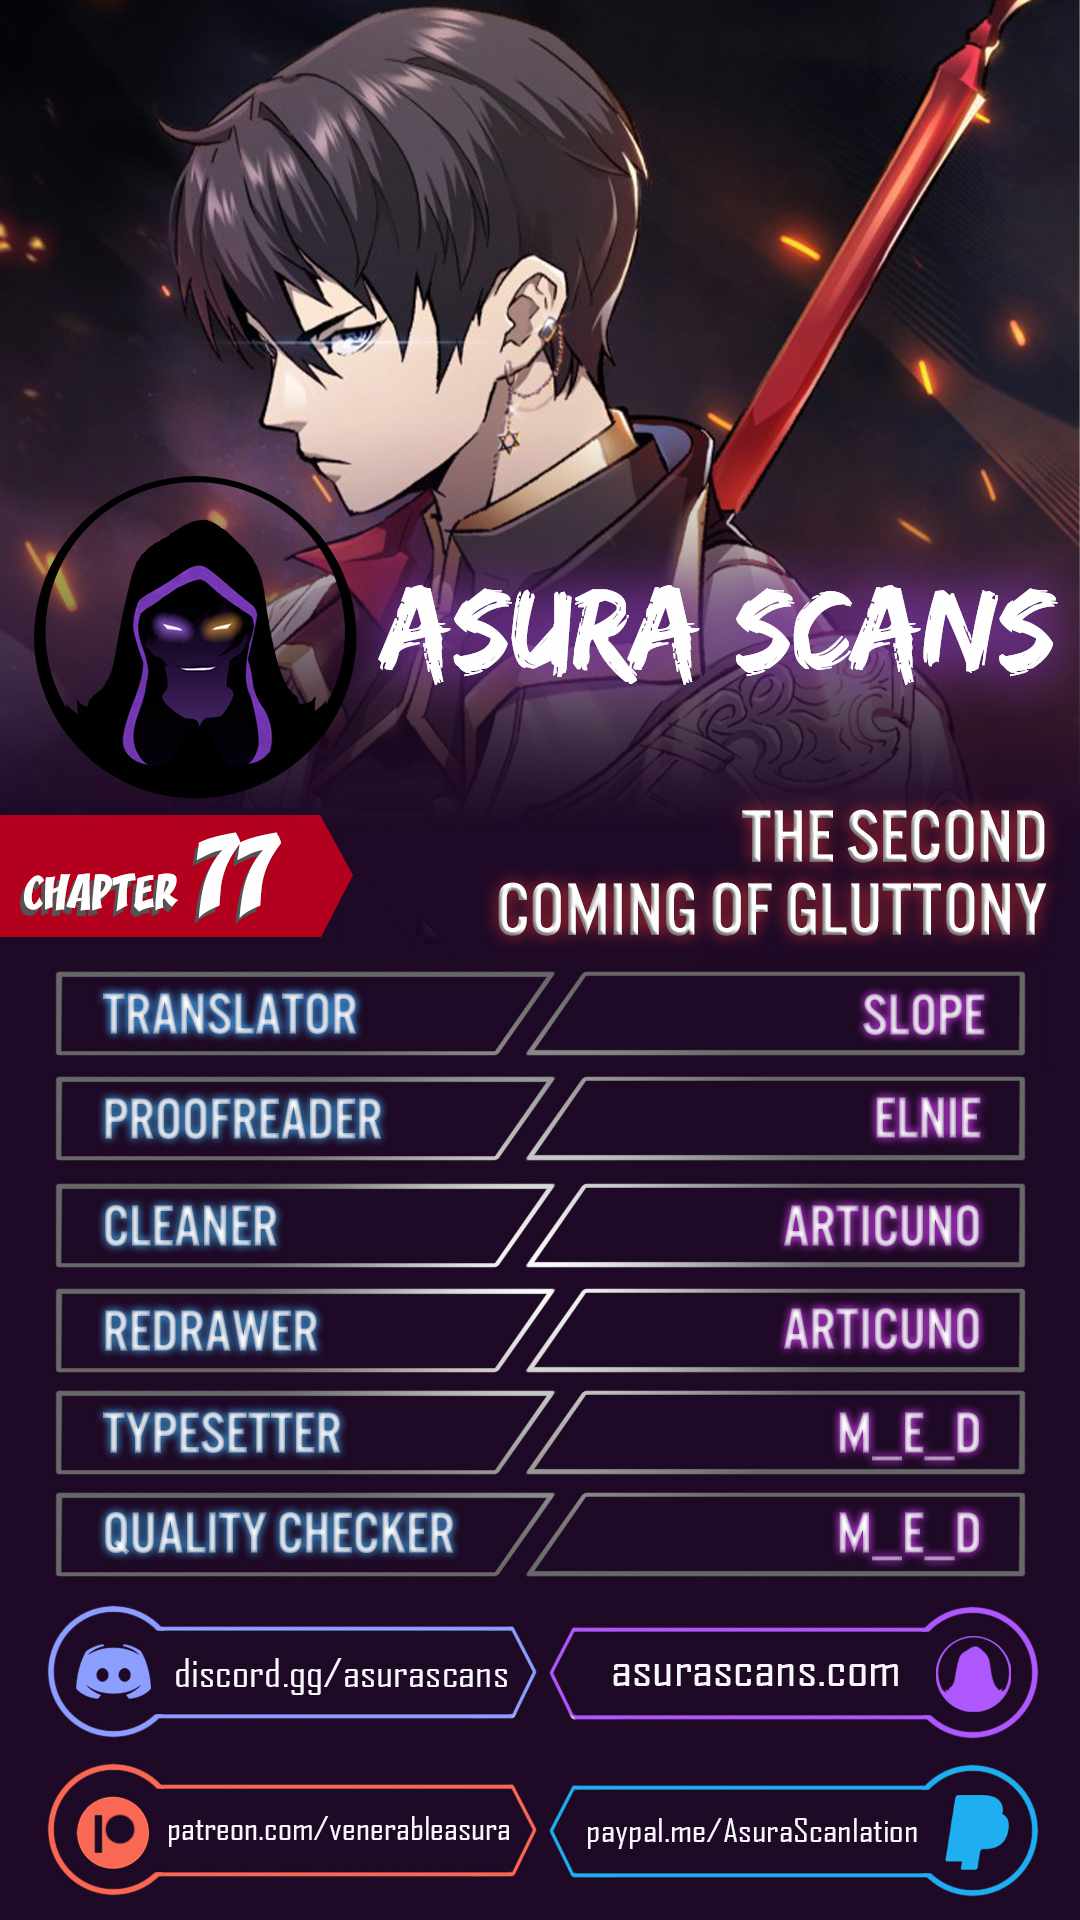 The Second Coming of Gluttony Chapter 77, The Second Coming of Gluttony 77, Read The Second Coming of Gluttony Chapter 77, The Second Coming of Gluttony Chapter 77 Manga, The Second Coming of Gluttony Chapter 77 english, The Second Coming of Gluttony Chapter 77 raw manga, The Second Coming of Gluttony Chapter 77 online, The Second Coming of Gluttony Chapter 77 high quality, The Second Coming of Gluttony 77 chapter, The Second Coming of Gluttony Chapter 77 manga scan